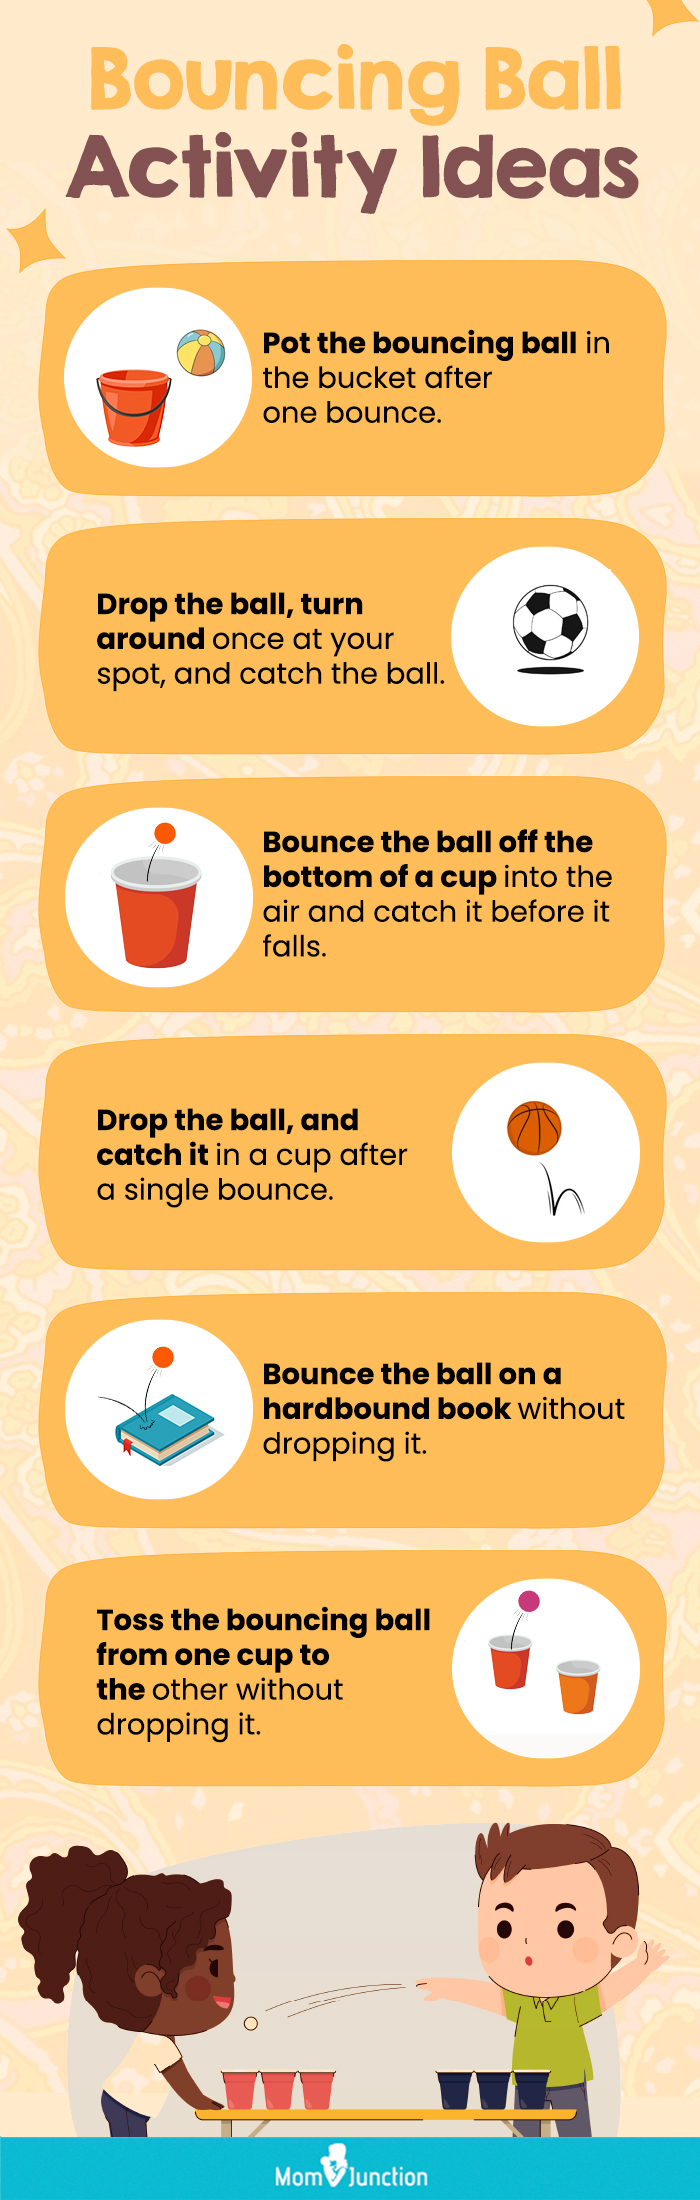 Bouncing Ball Activity Ideas (infographic)